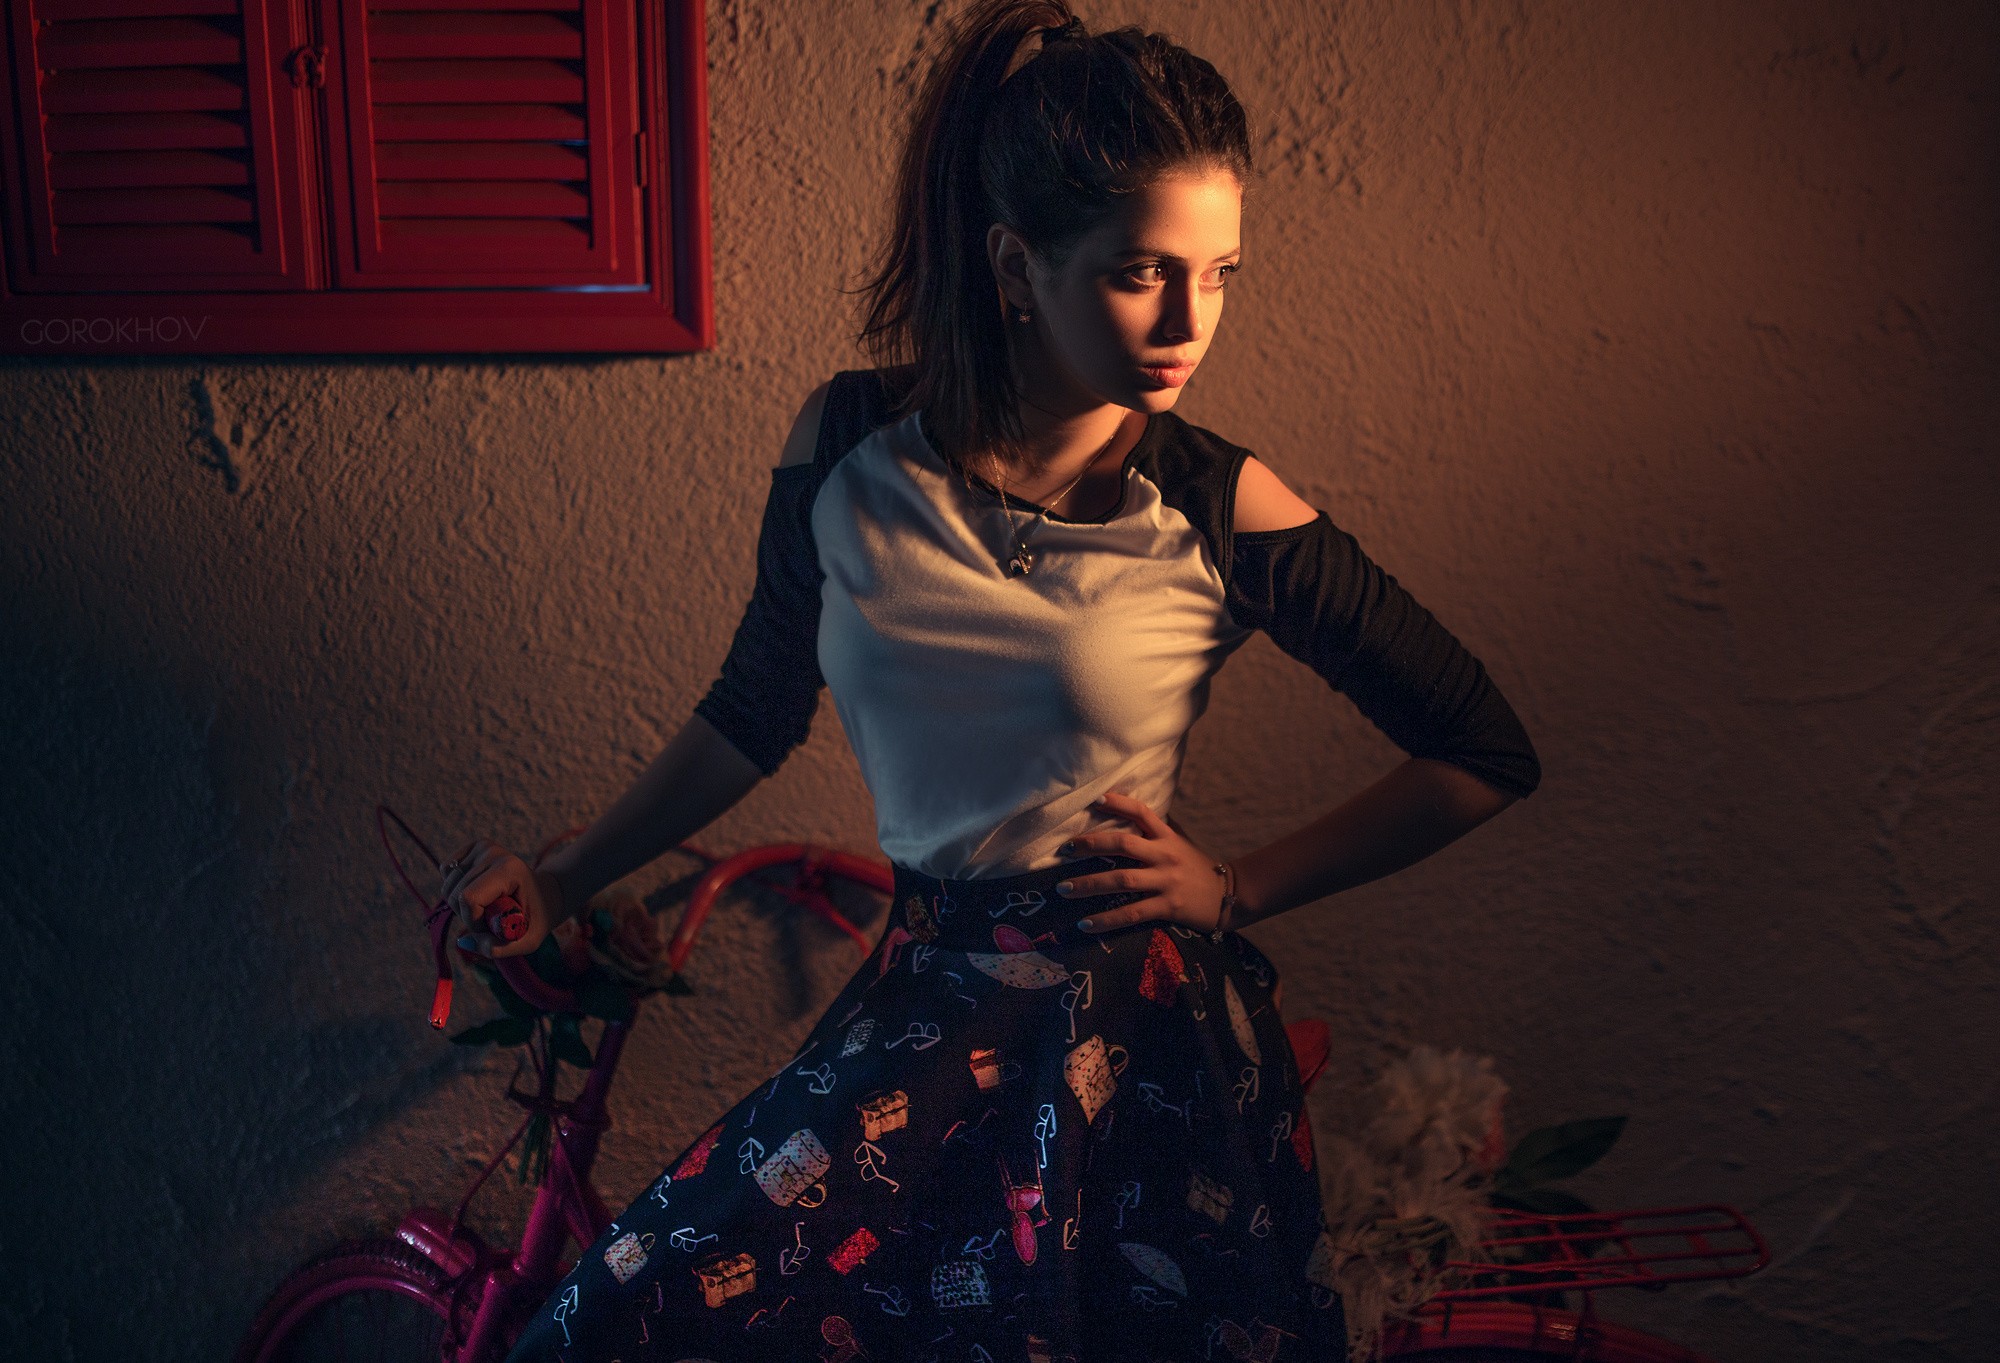 People 2000x1363 Ivan Gorokhov 500px photography women women with bicycles vehicle model hands on waist looking away watermarked women outdoors brunette long hair necklace skirt